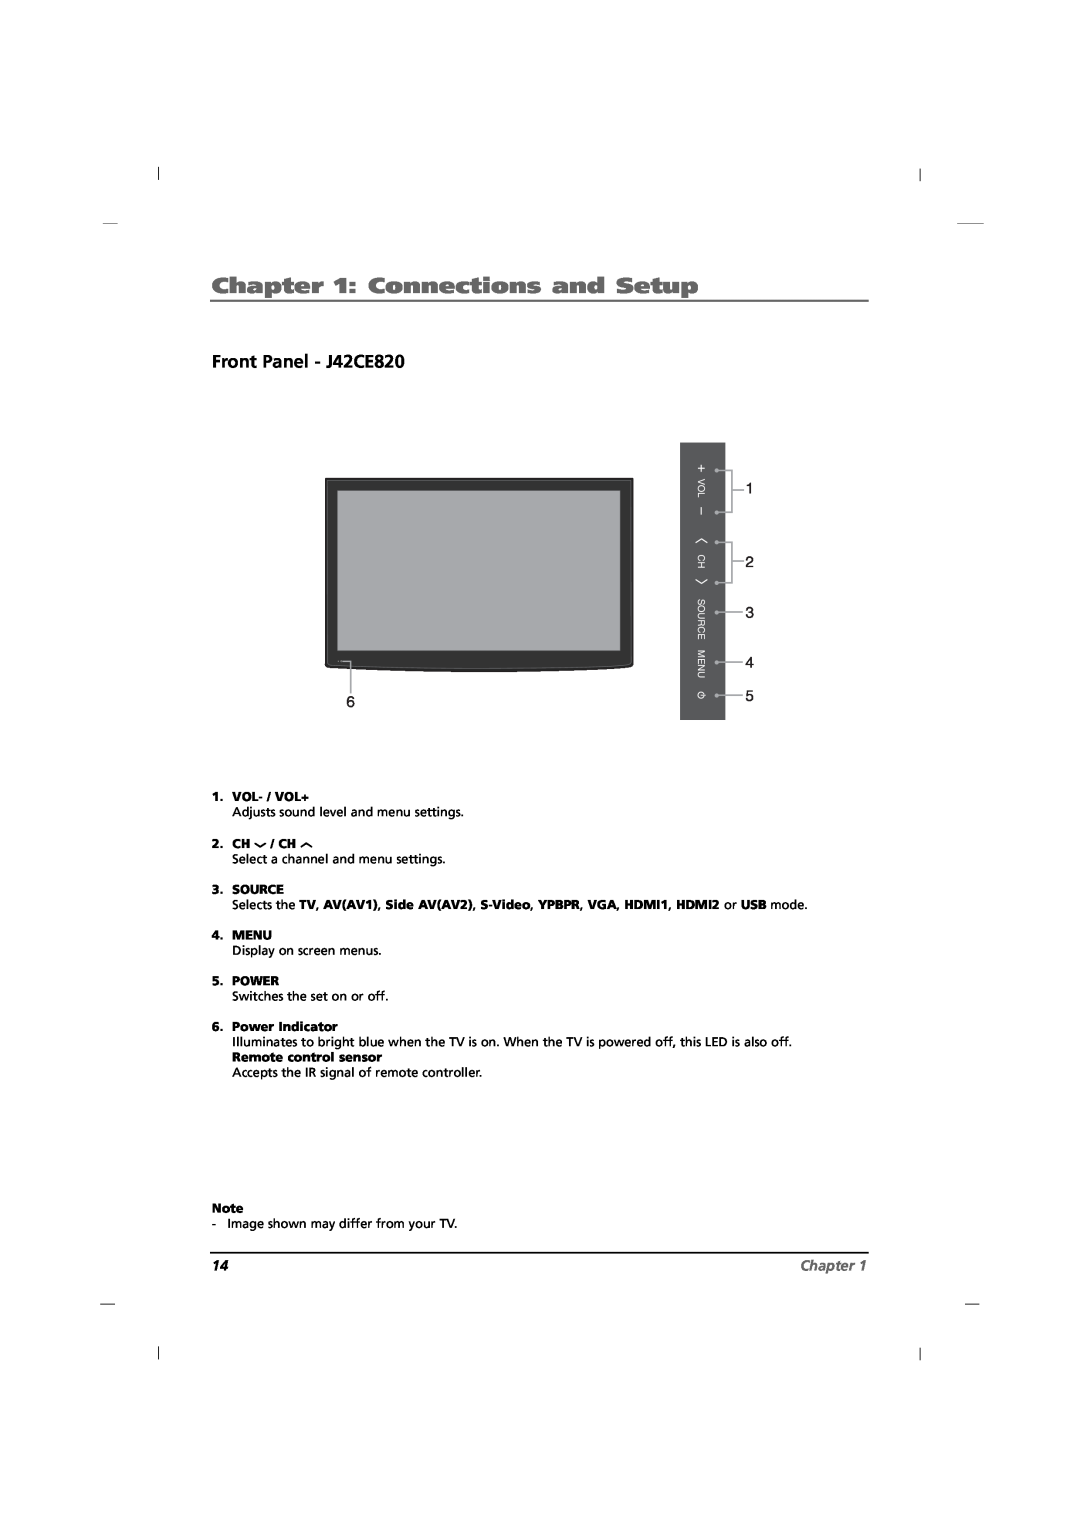 RCA J26CE820, J32CE720 manual Front Panel - J42CE820, Connections and Setup, Chapter, Volch Source Menu 